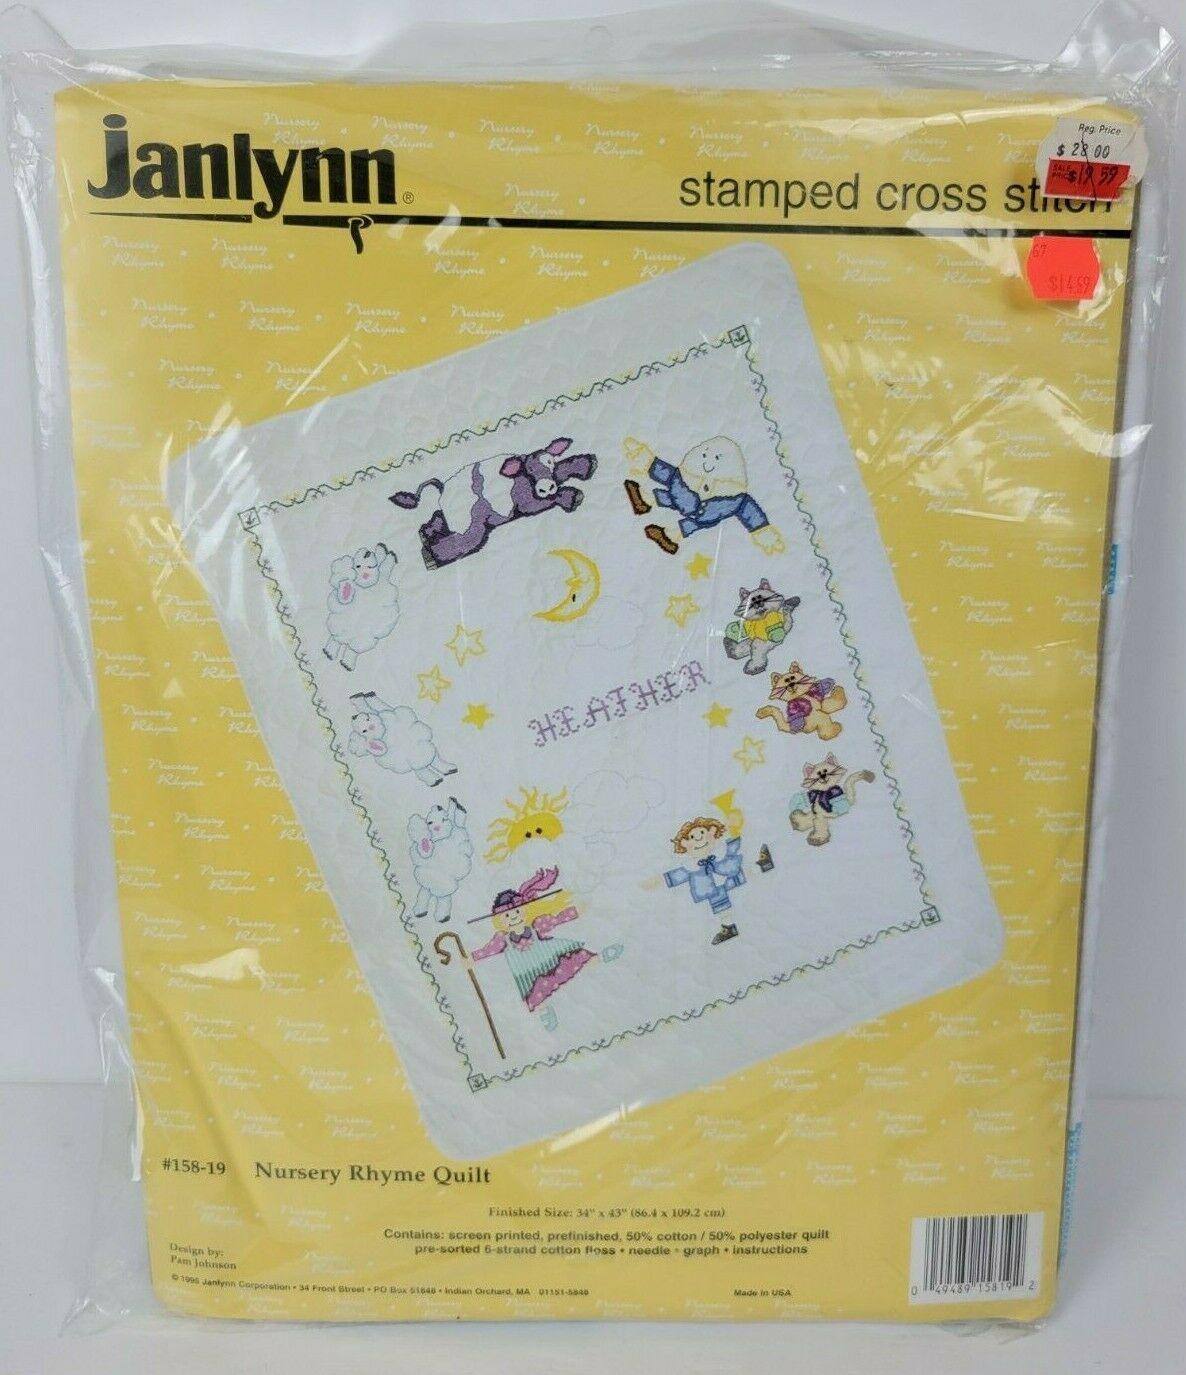 Primary image for NIP Janlynn Stamped Cross Stitch Nursery Rhyme Quilt Kit 158-19 34x43 1995